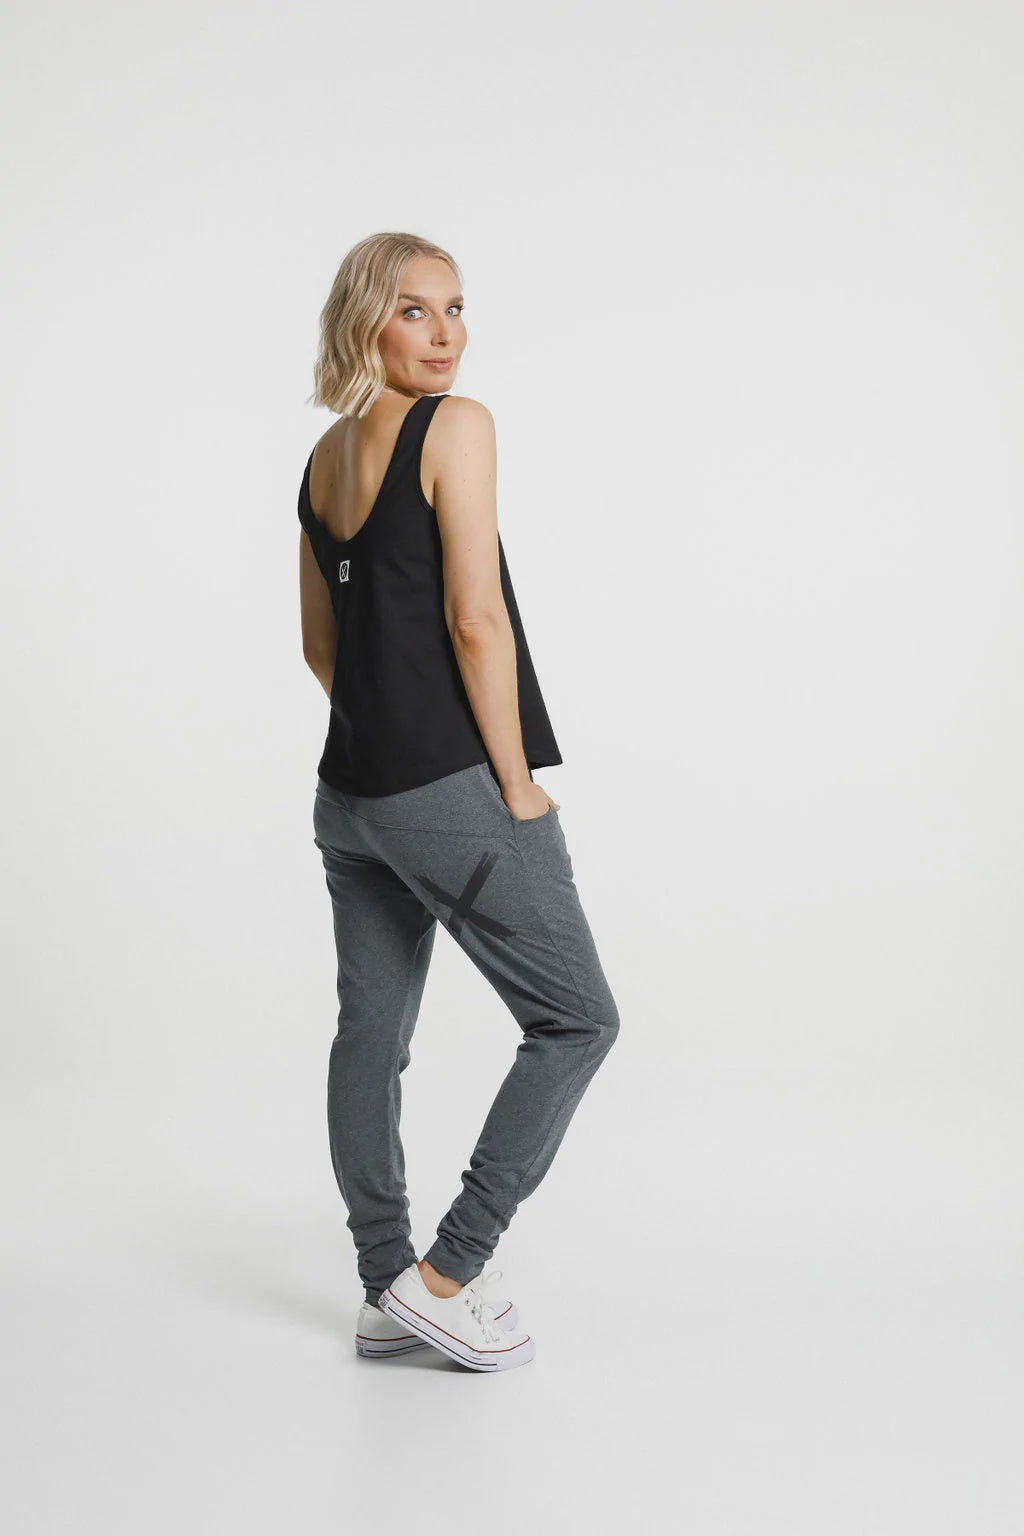 Home-Lee Apartment Pants Charcoal with Matte Black X